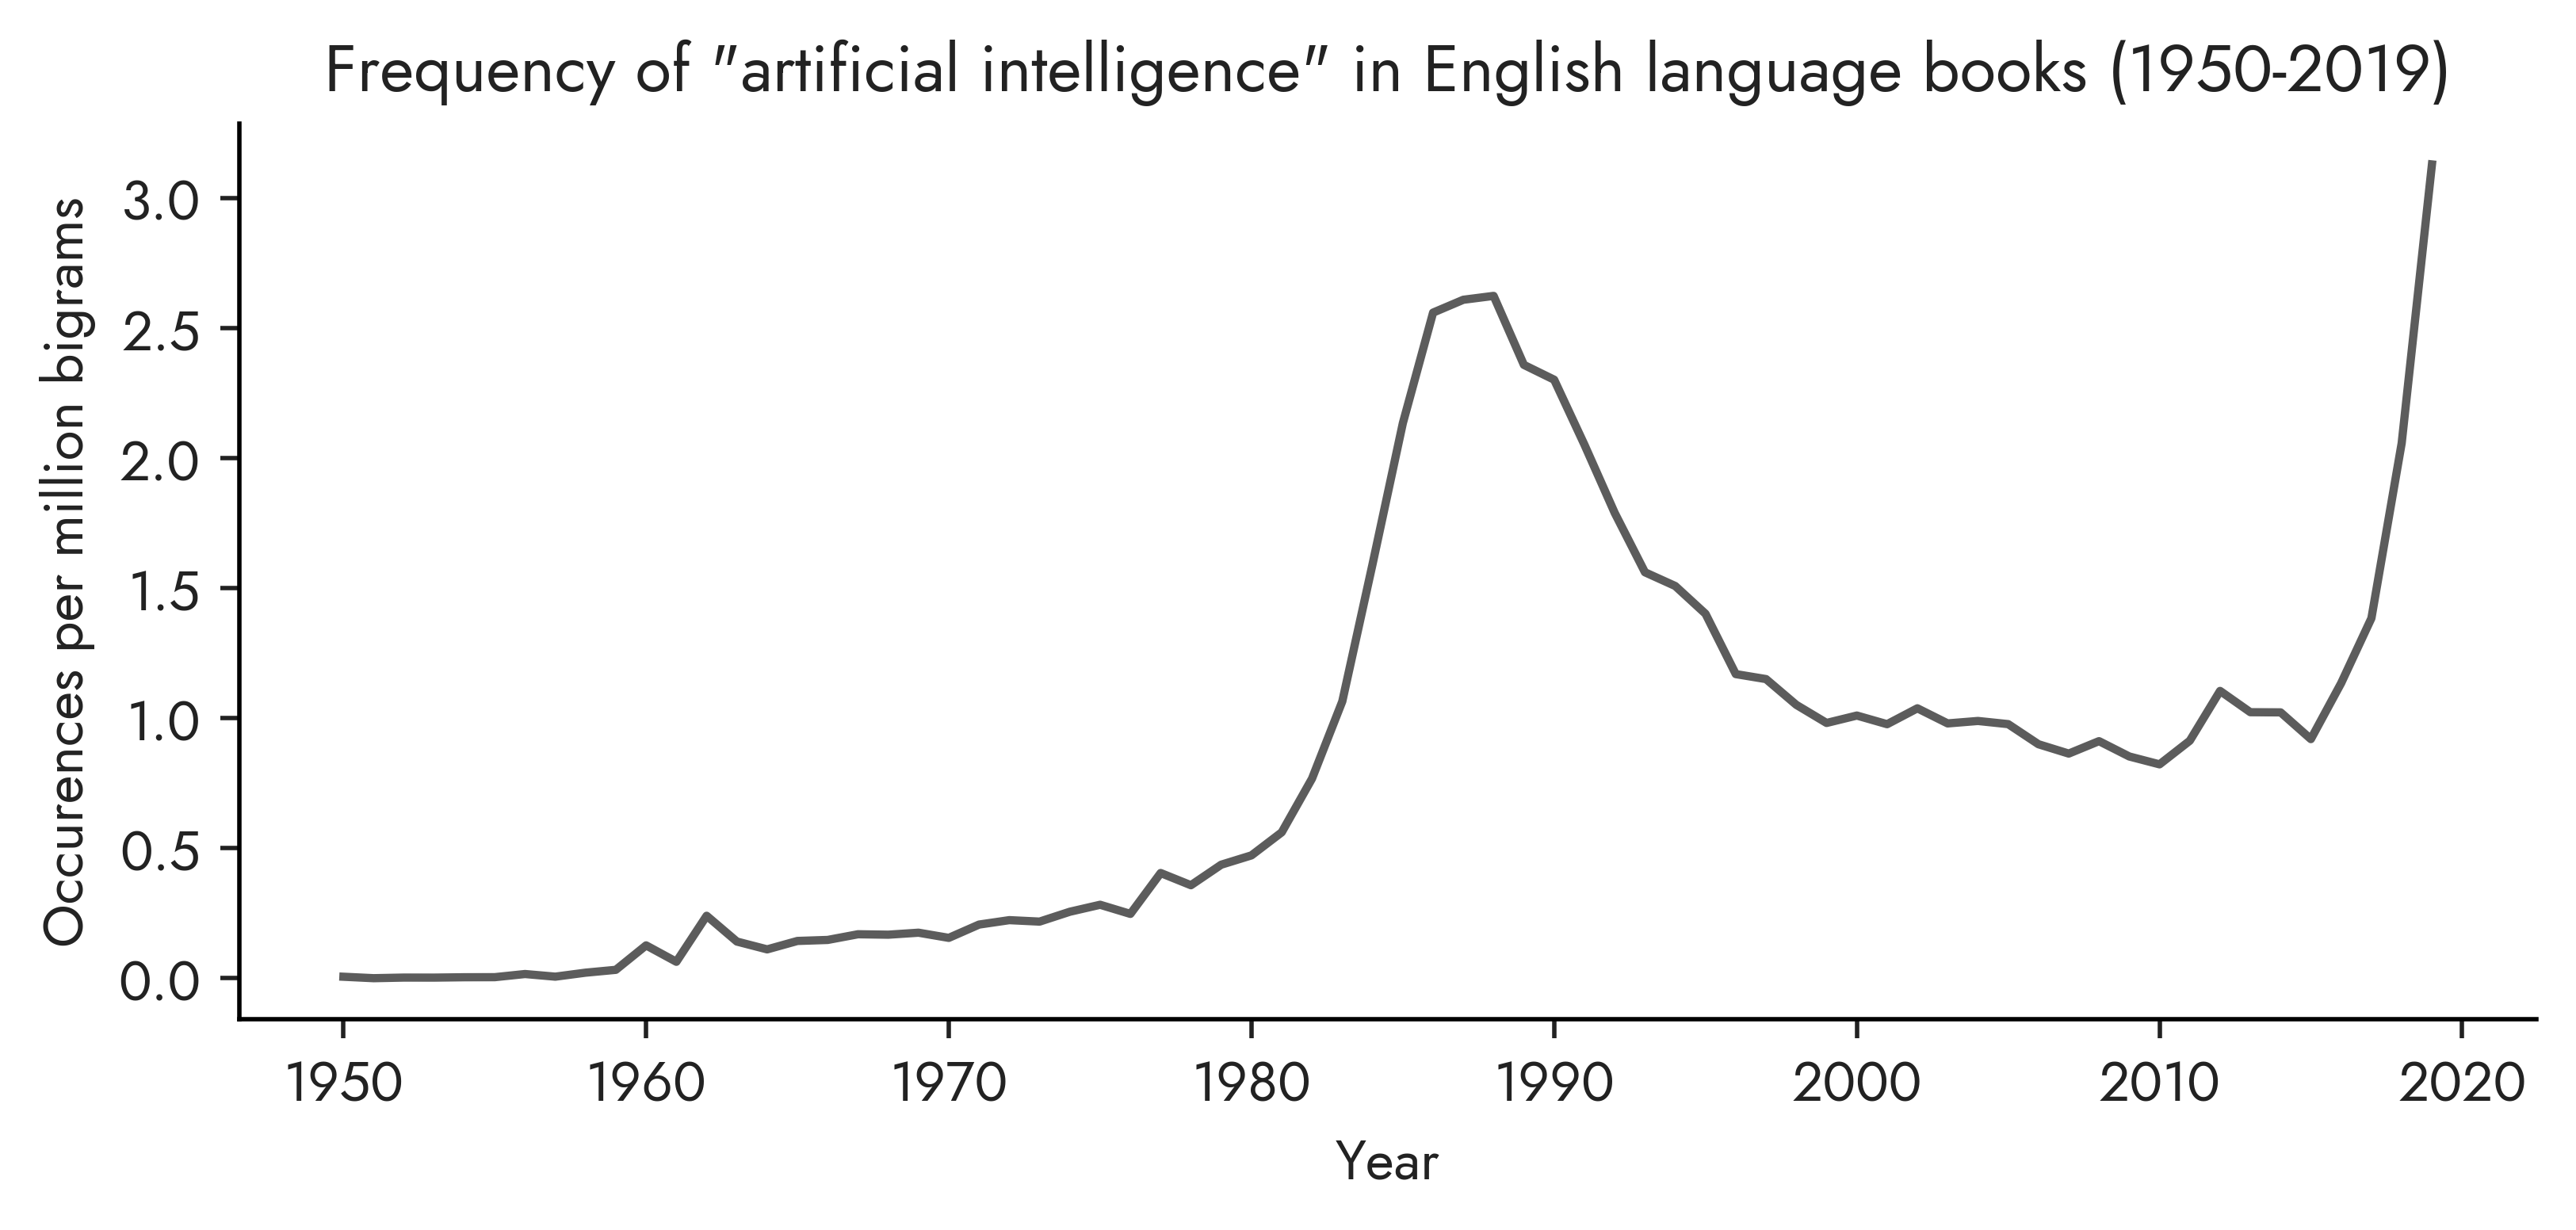 Shows the relative frequency in English books of "artificial intelligence" from 1950-2019 showing a surge in the late 1980s followed by a retreat and then a much greater surge beginning in the mid 2010s.